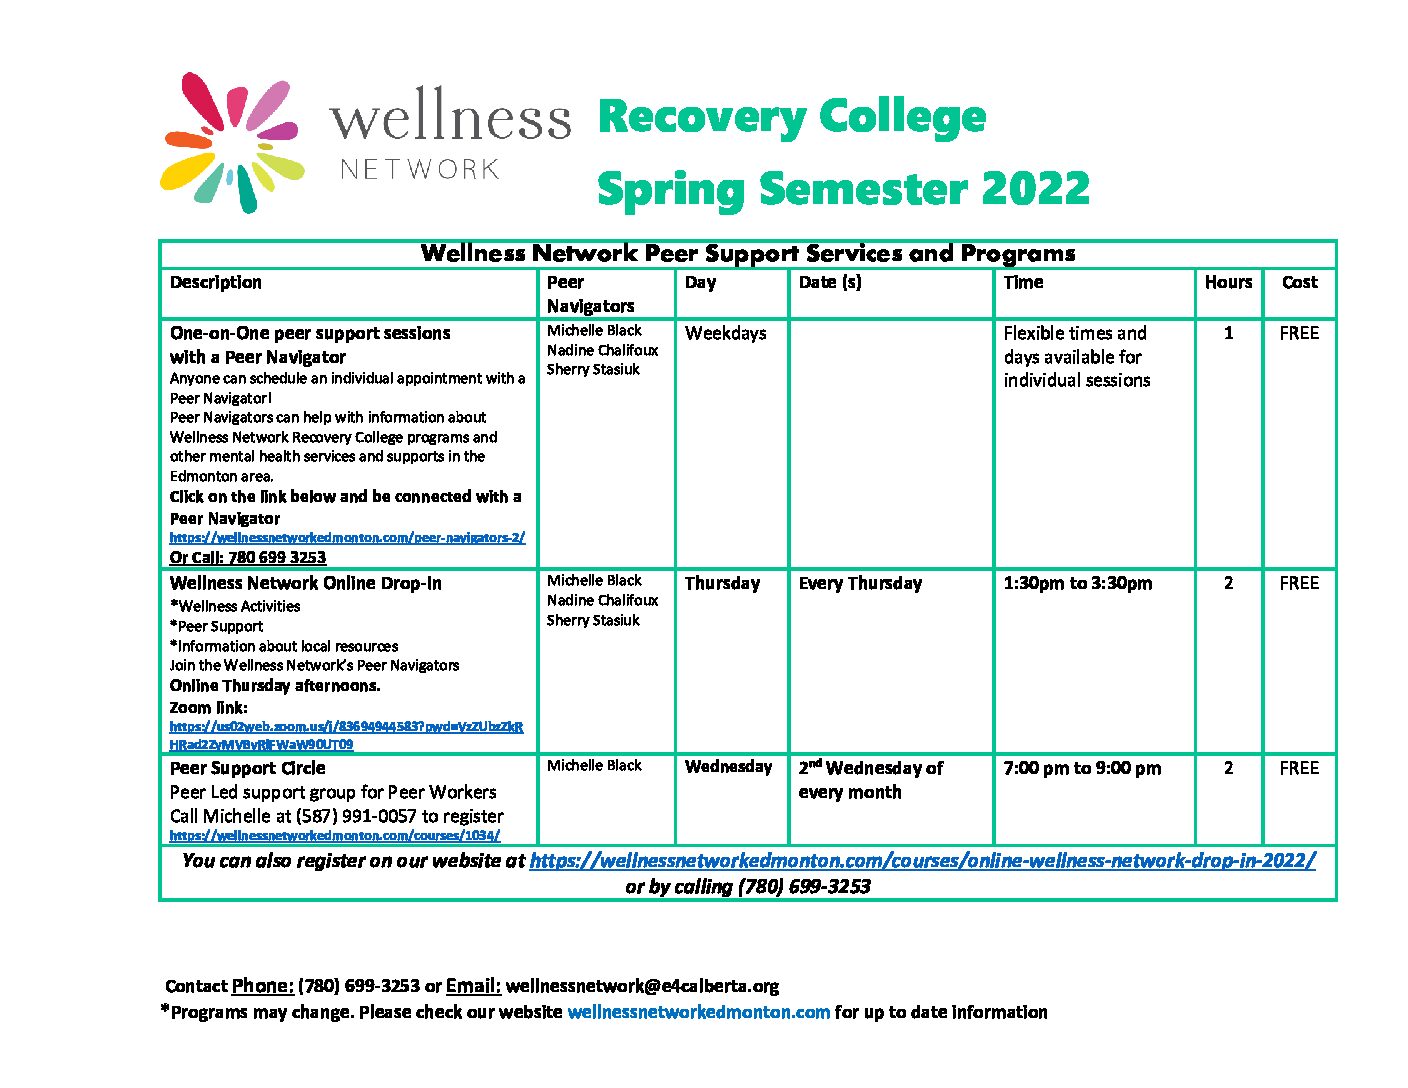 Wellness Network Recovery College Spring Semester Flyer